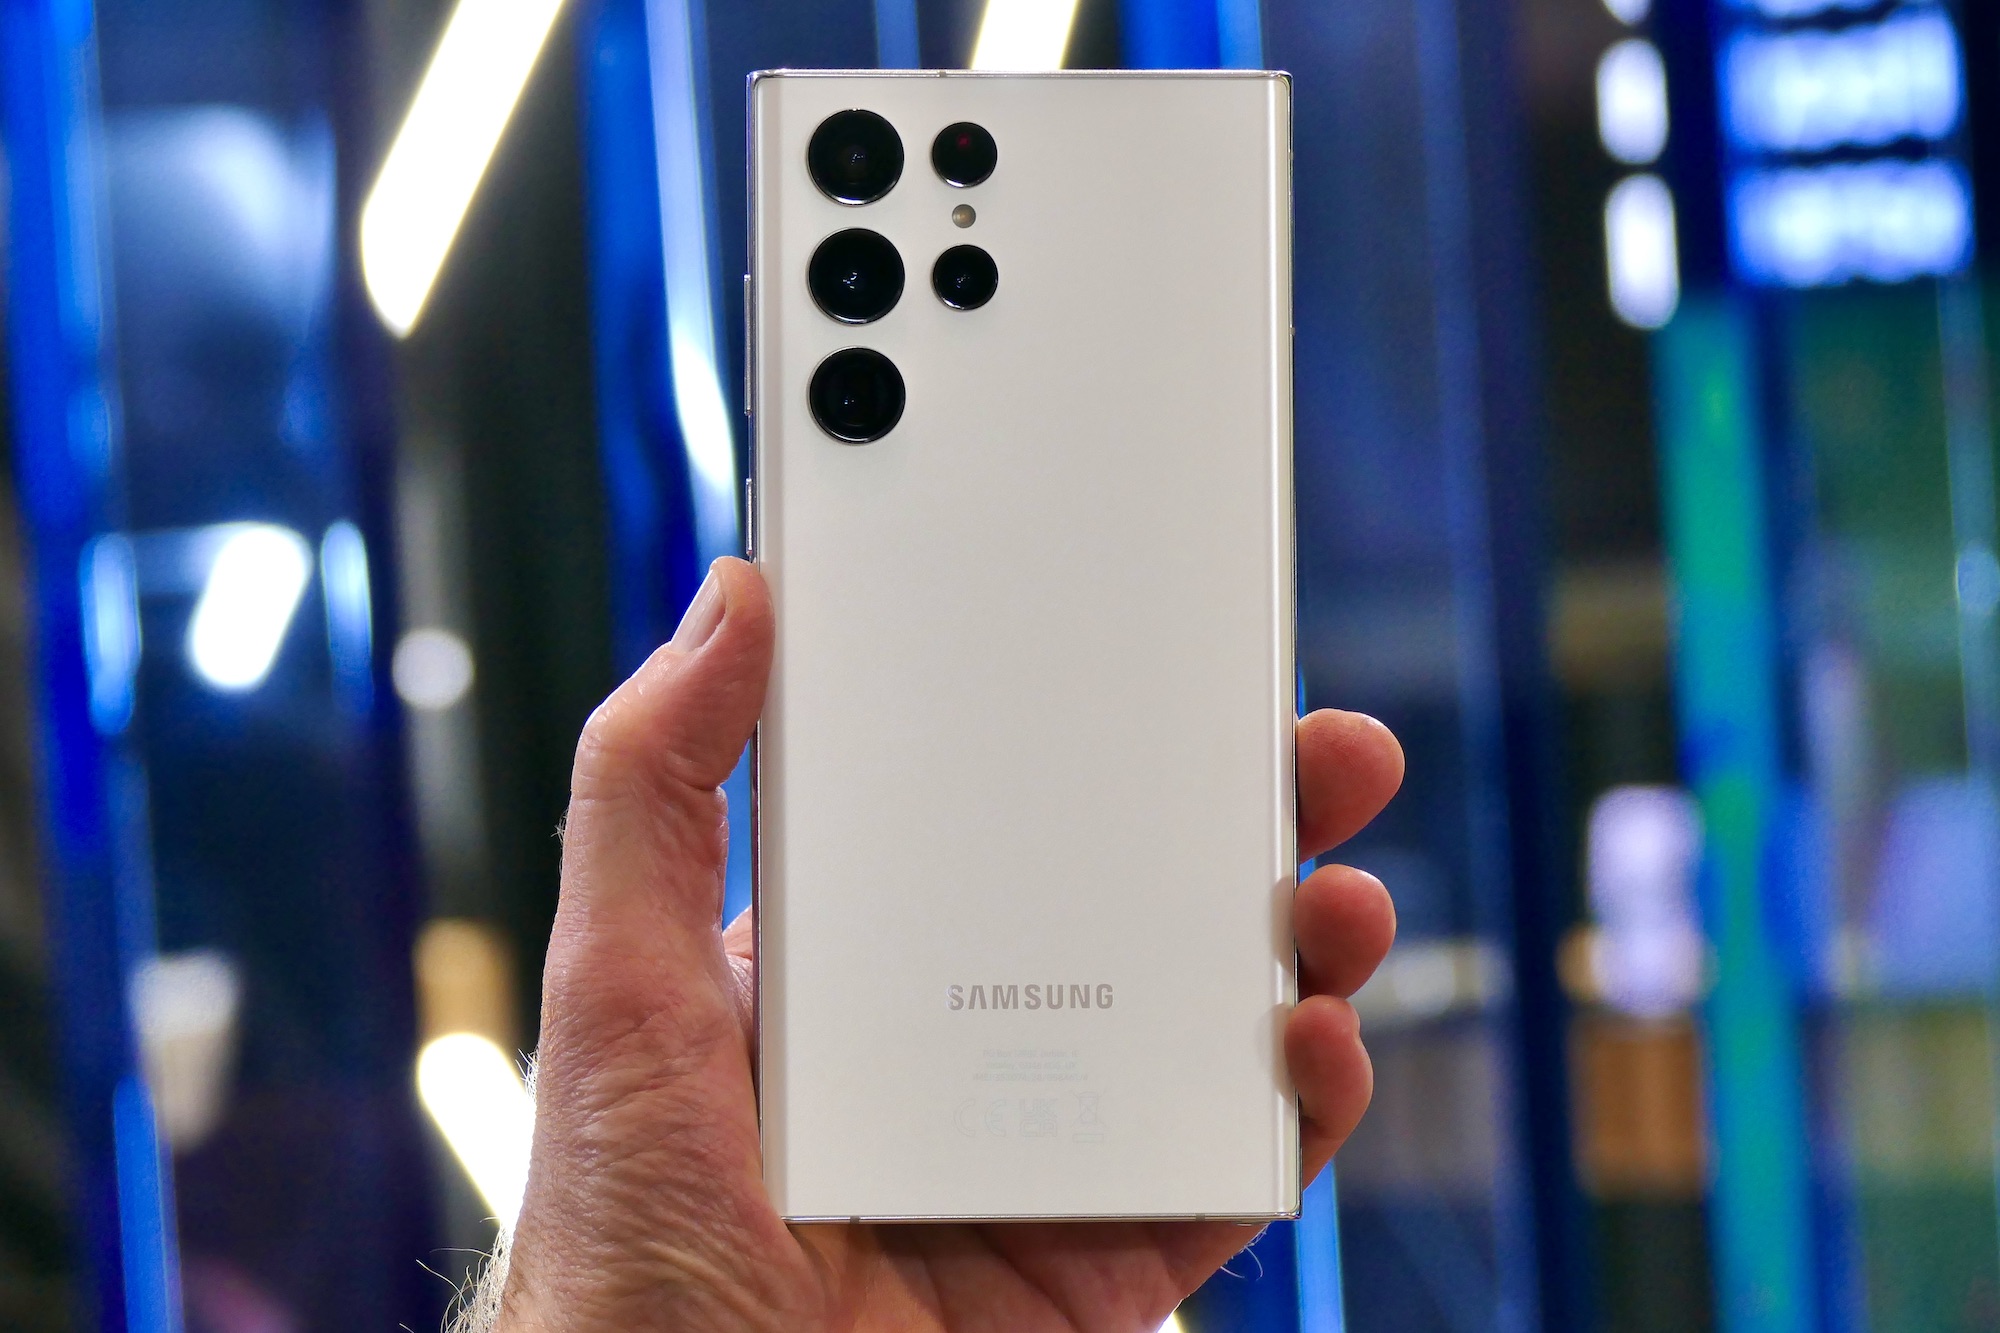 Camera Advancements - Samsung's Impact on the Smartphone Industry